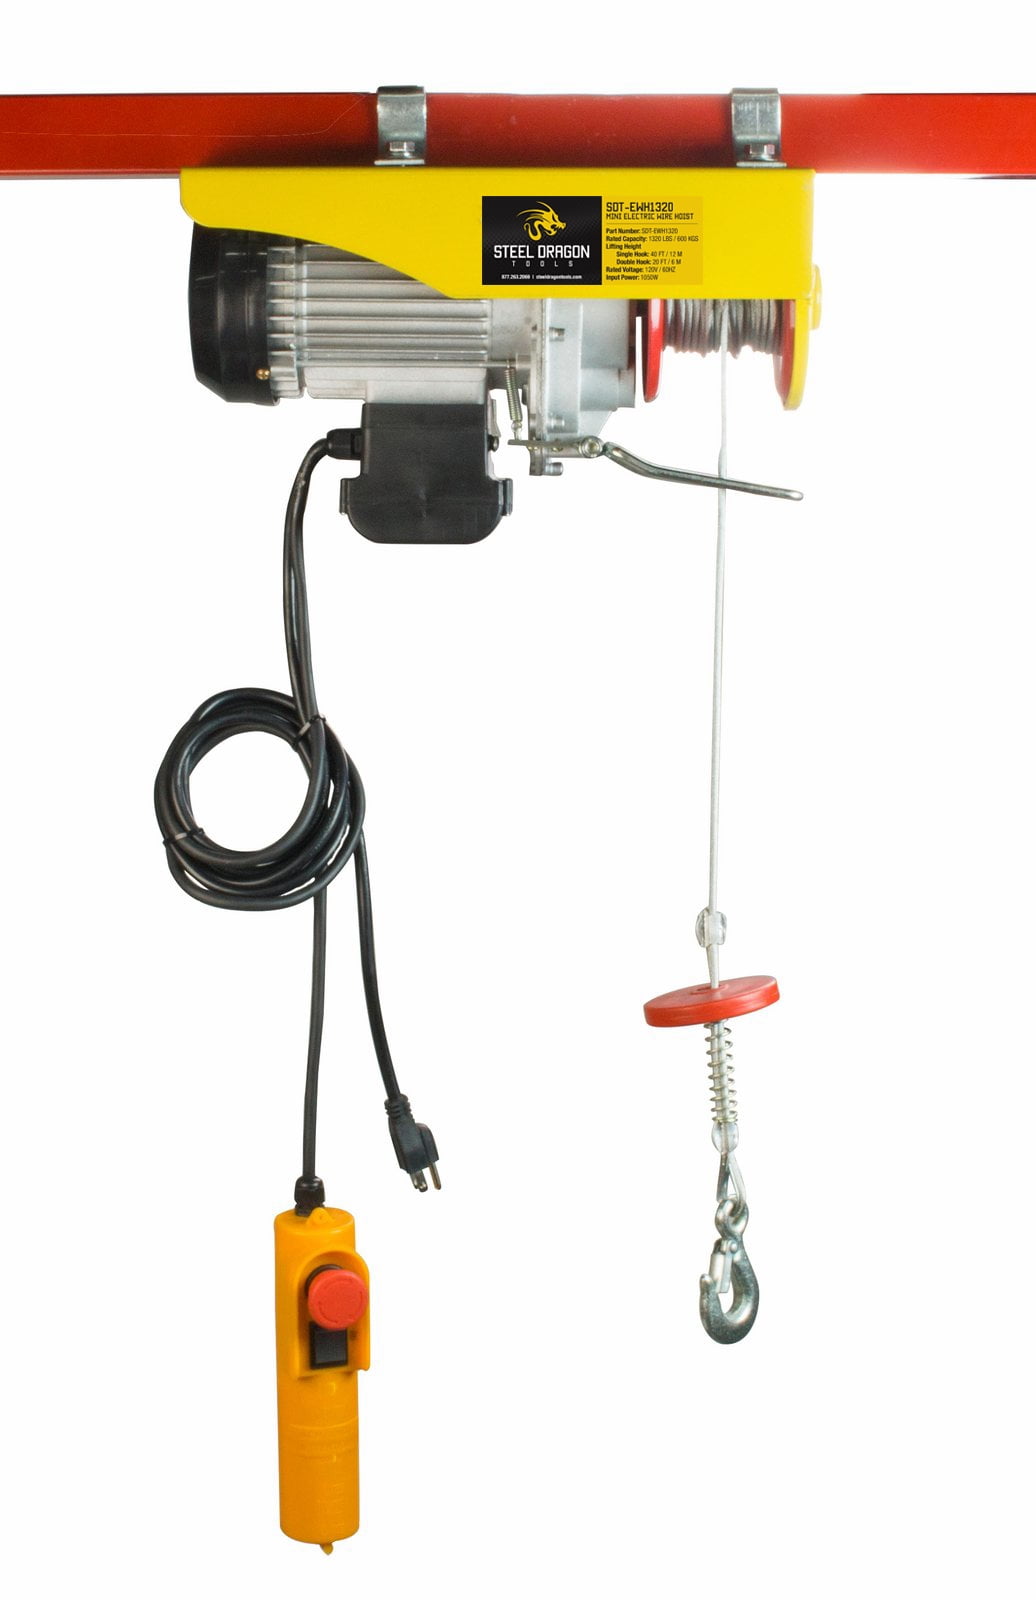 1320LBS Electric Wire Hoist Remote Control Garage Auto Shop Overhead Cable Lift 